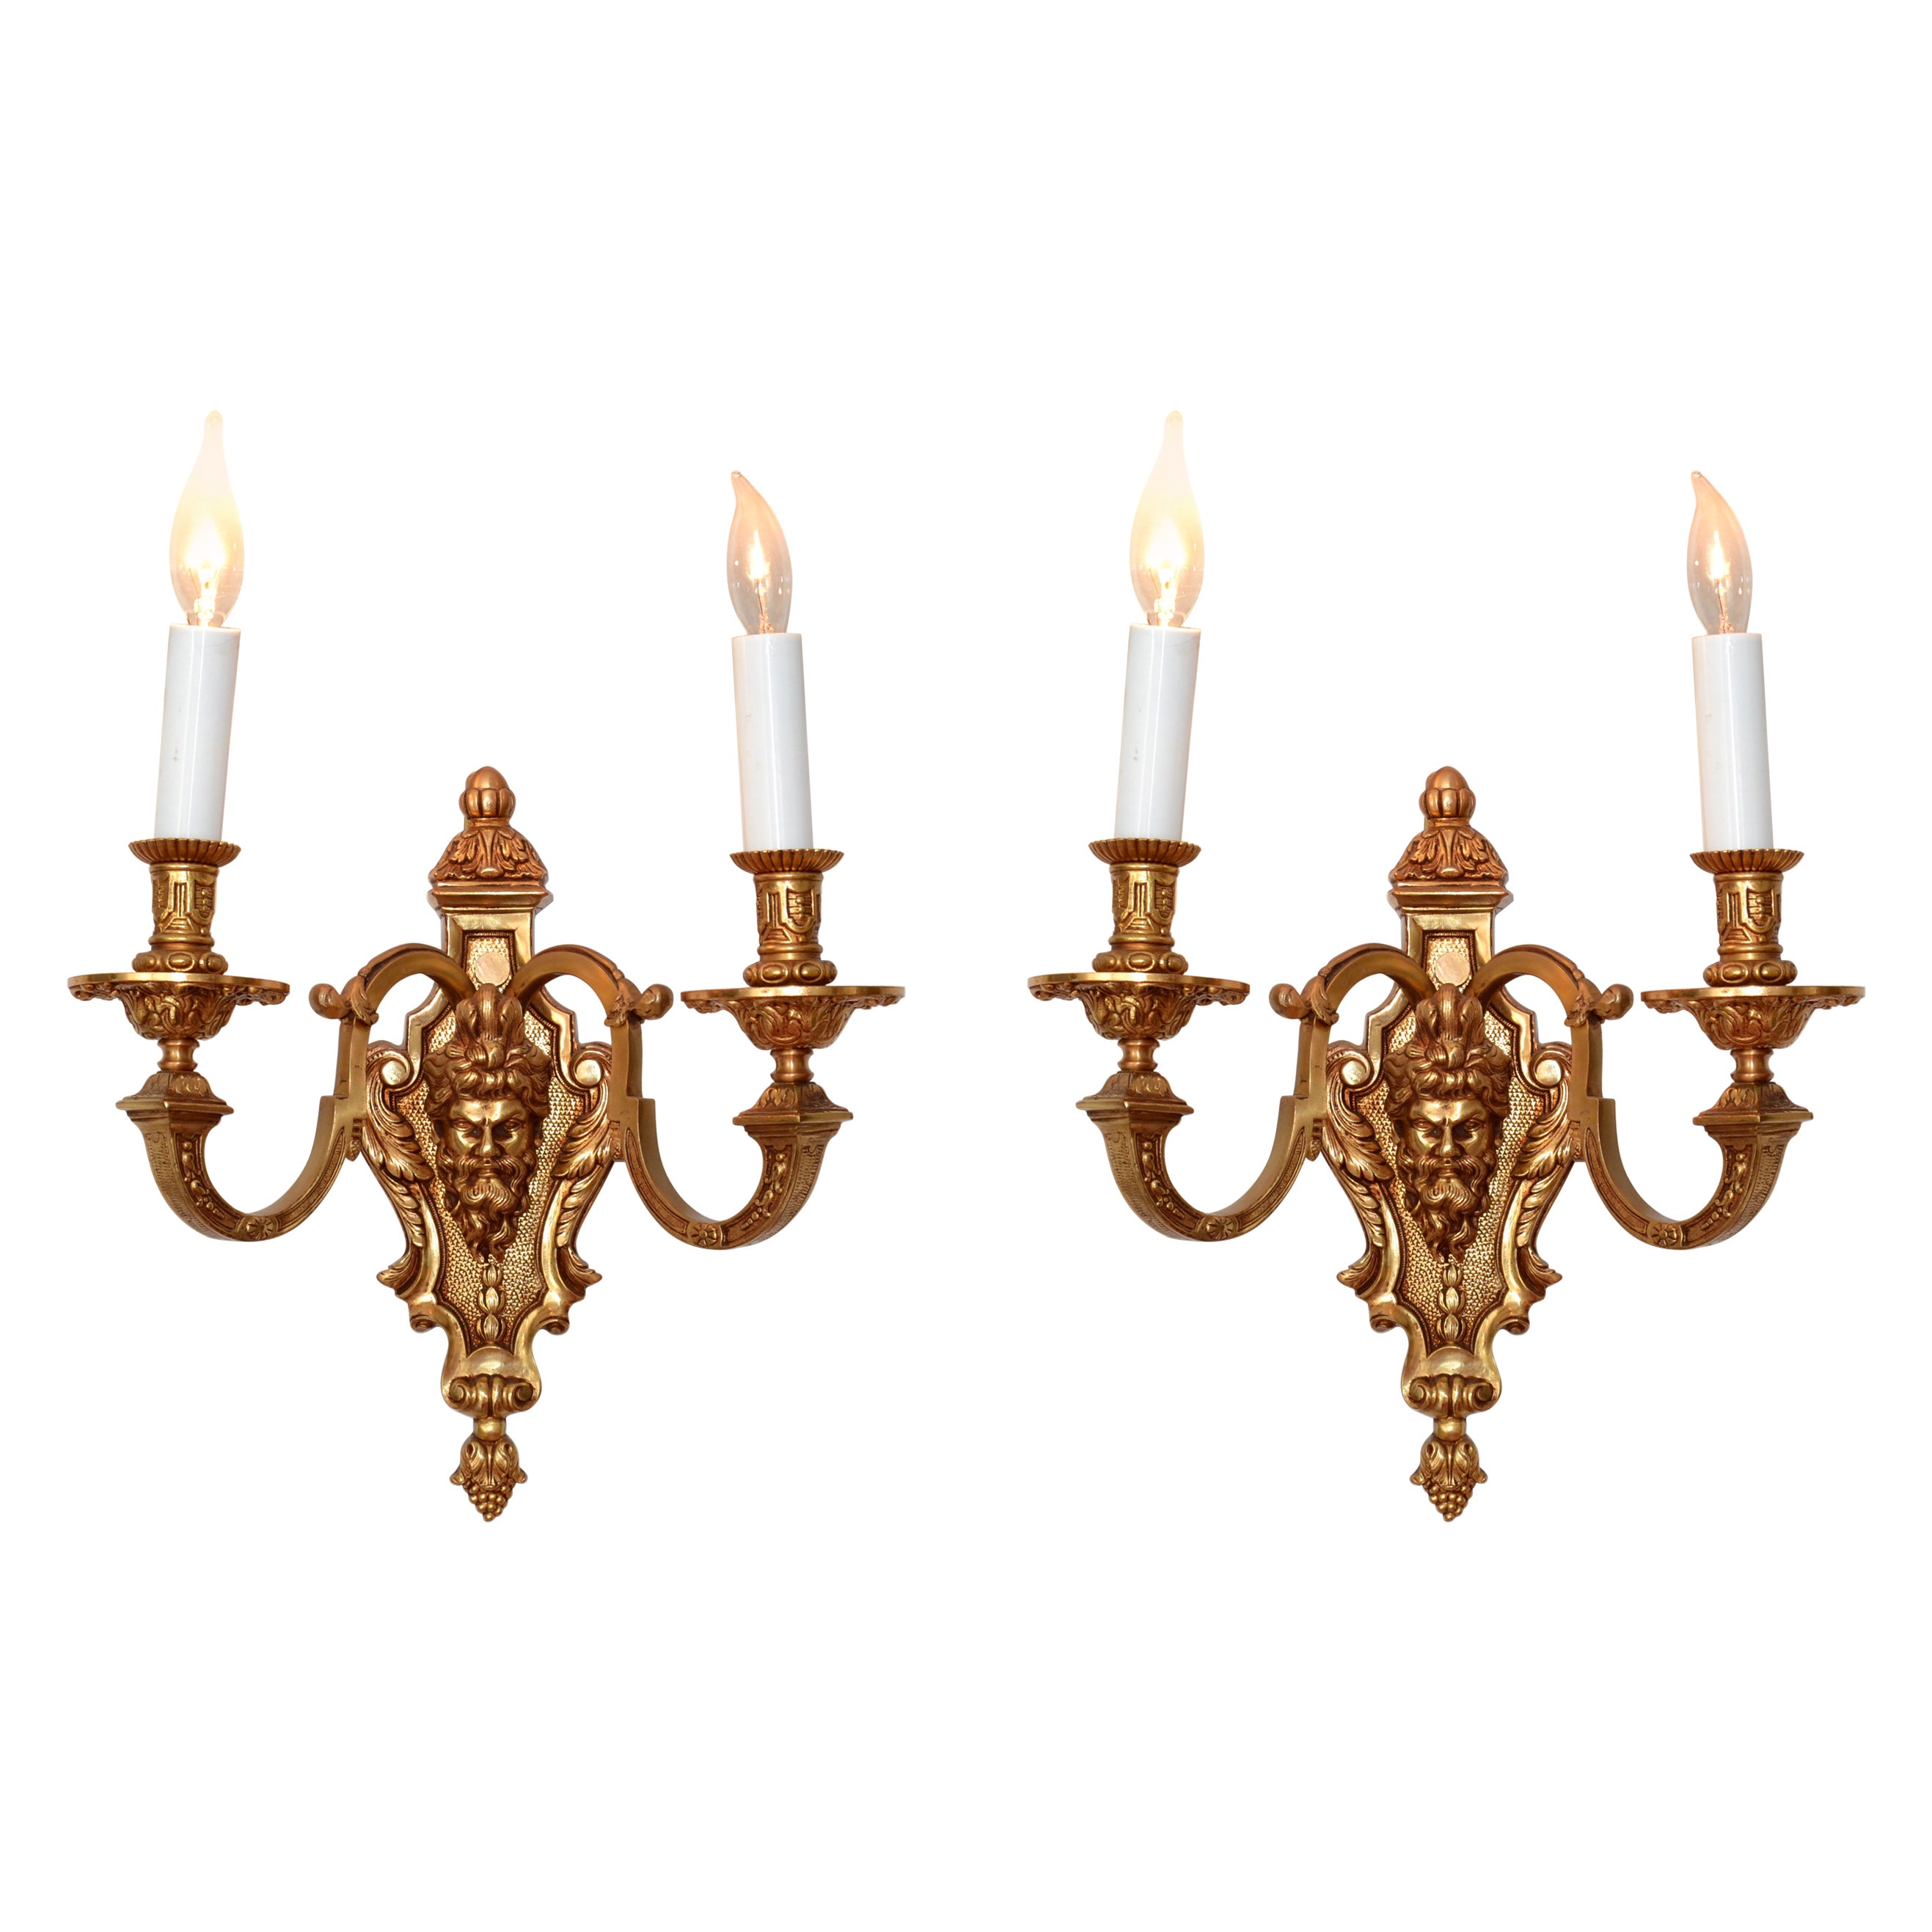 Pair of Second Empire Heavy 2 Light Bronze Sconces Wall Lights Late 19th Century For Sale